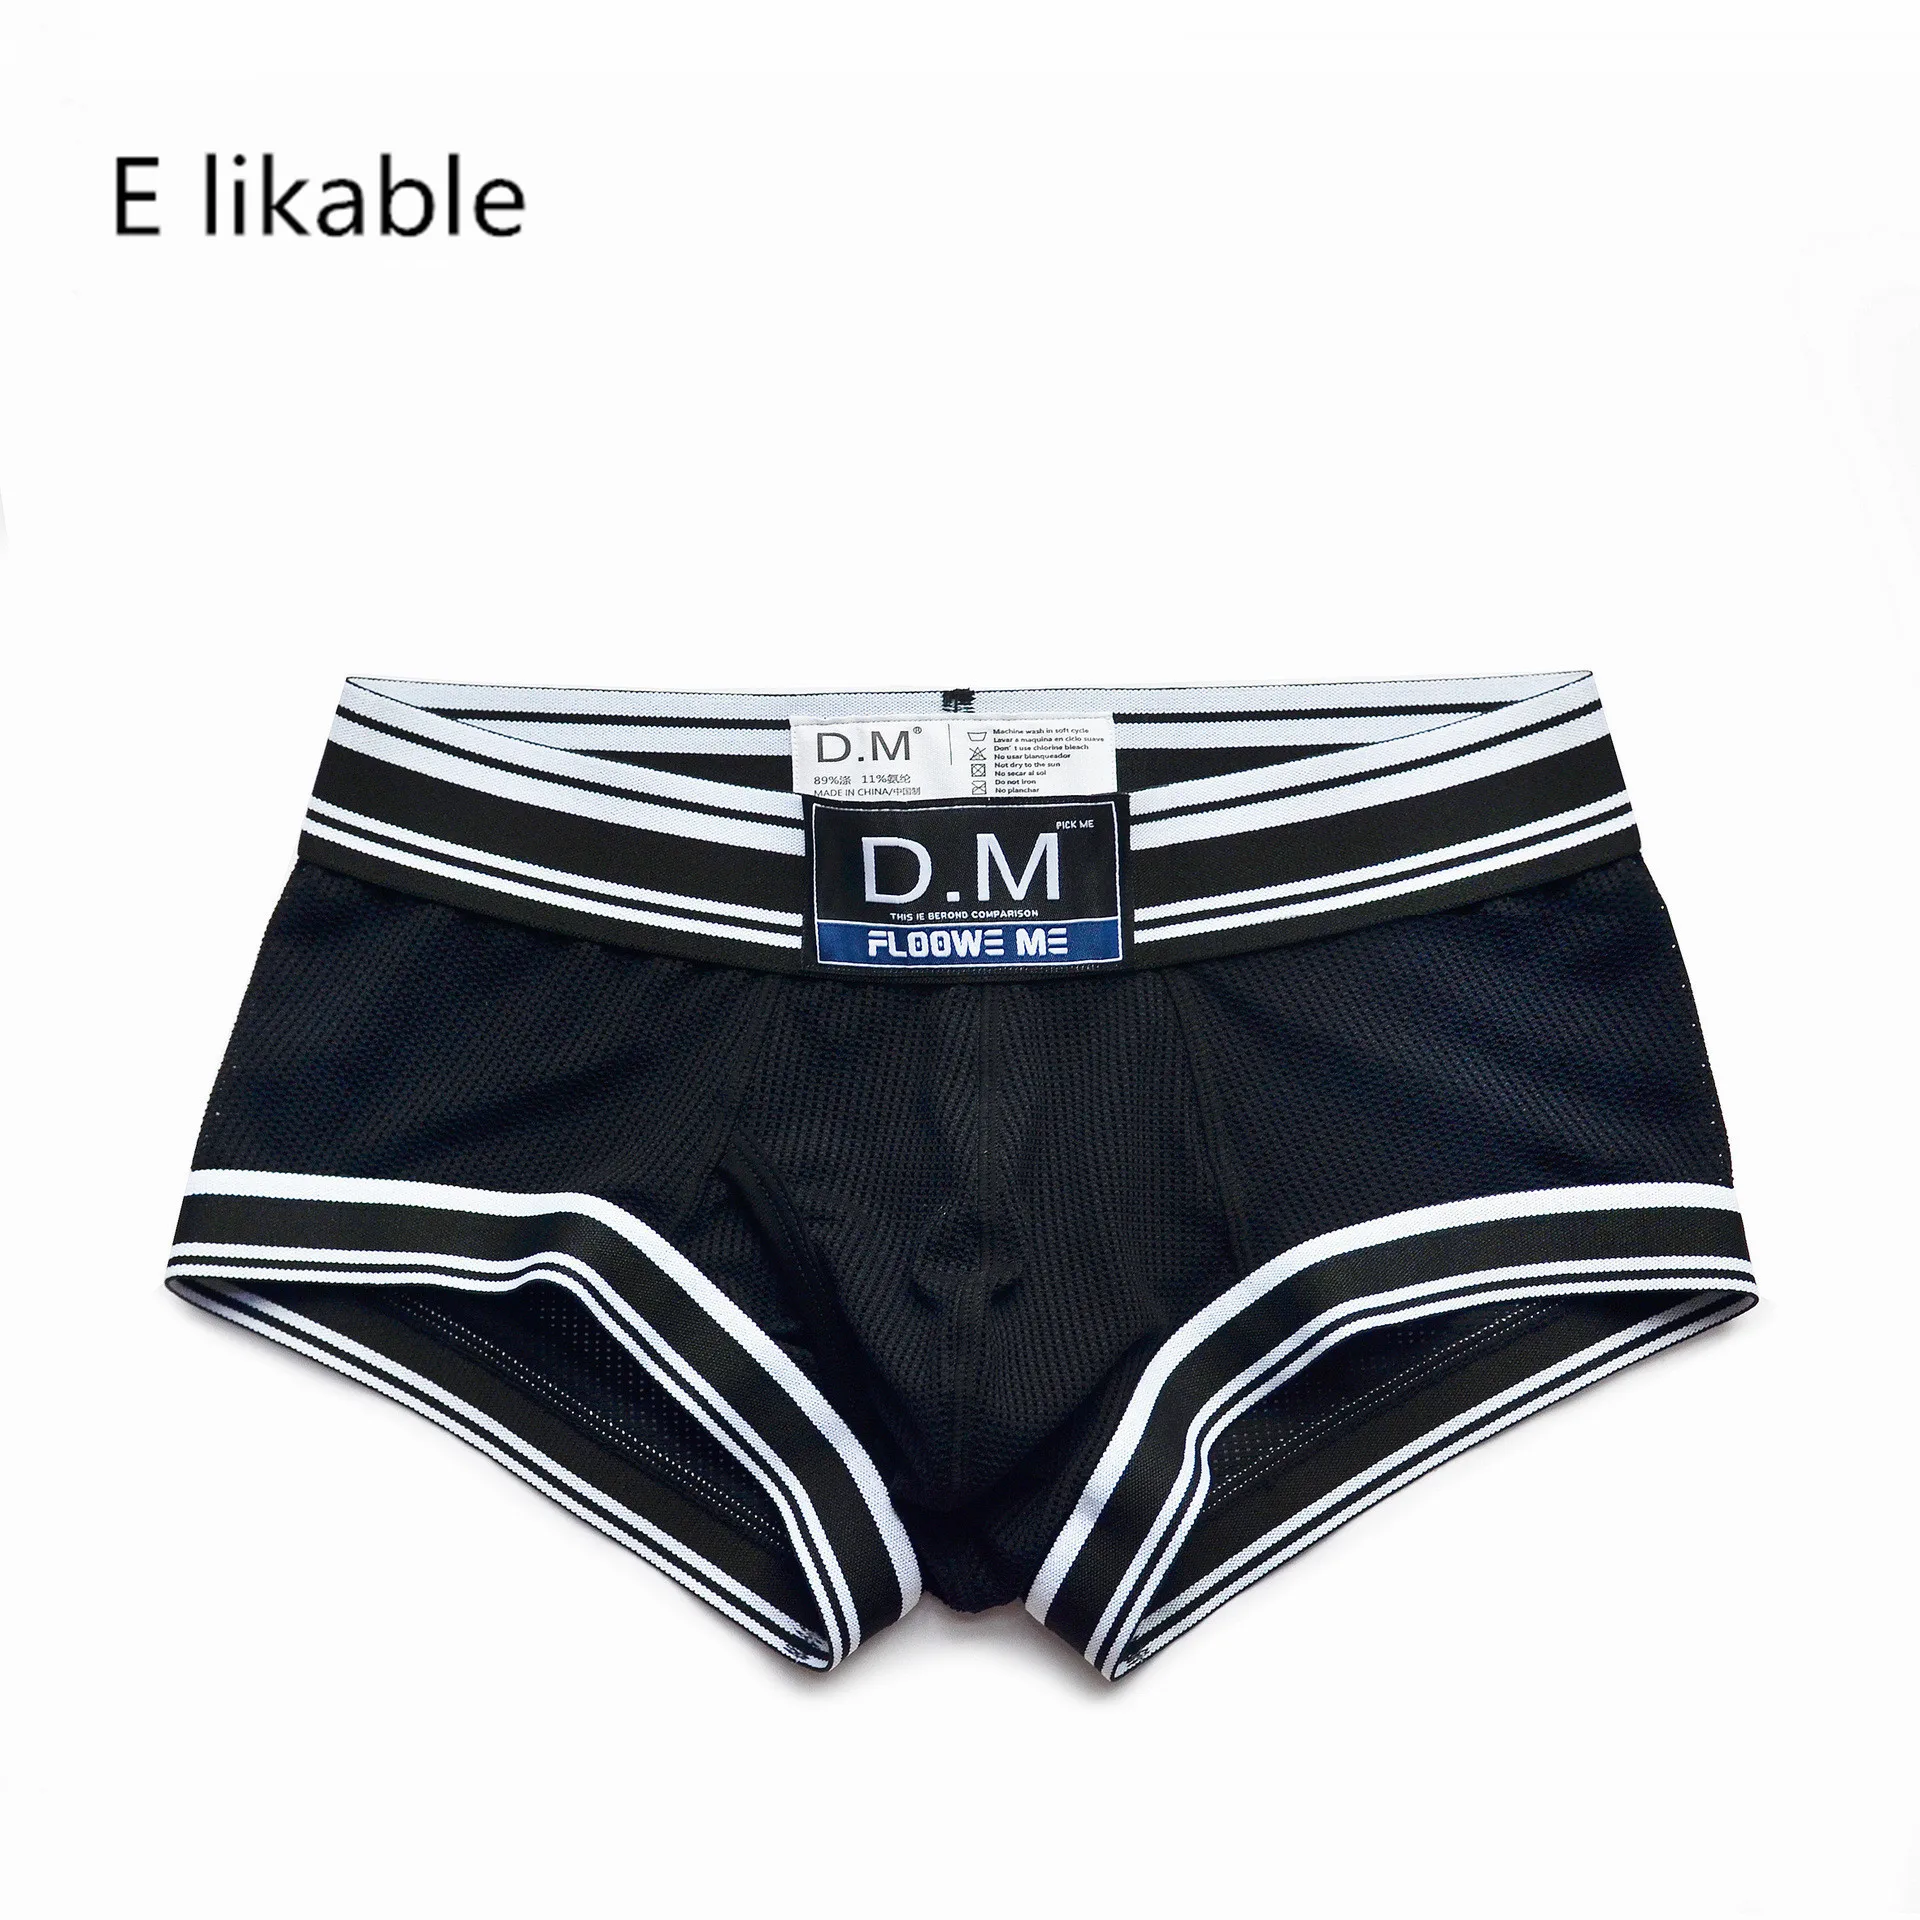 E likable new youth fashion personality men's underwear low waist sexy breathable comfort wild boyshort